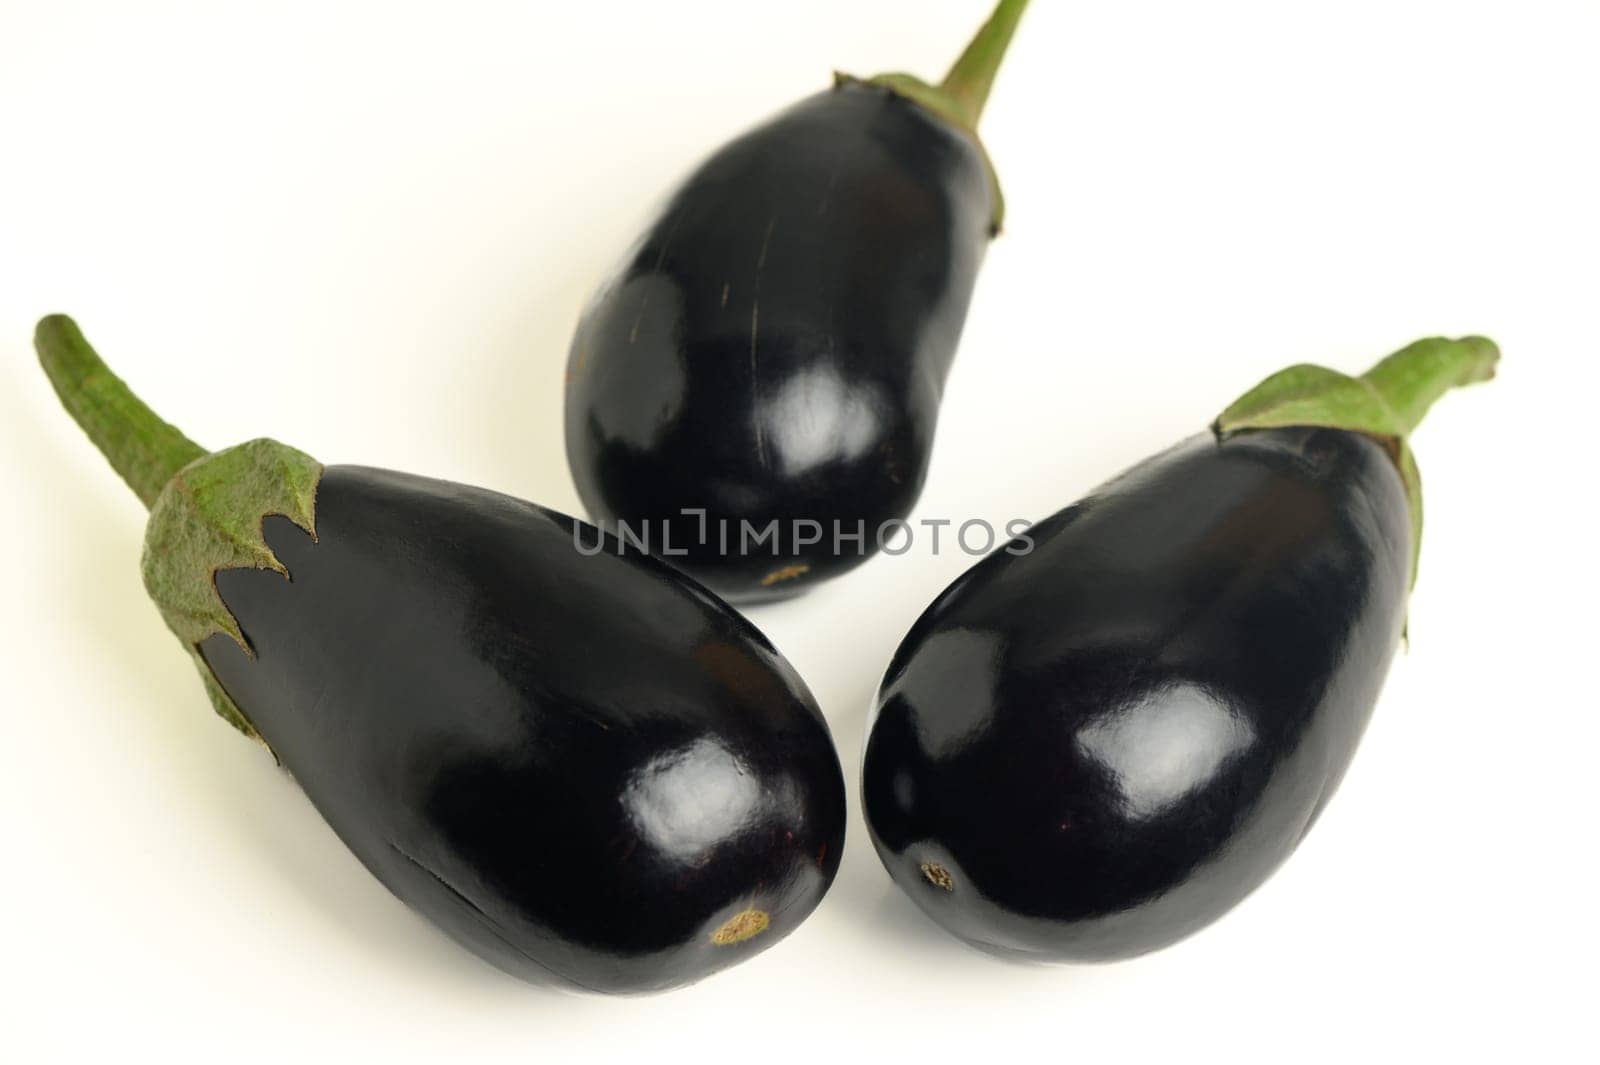 appetizing eggplants on a white background